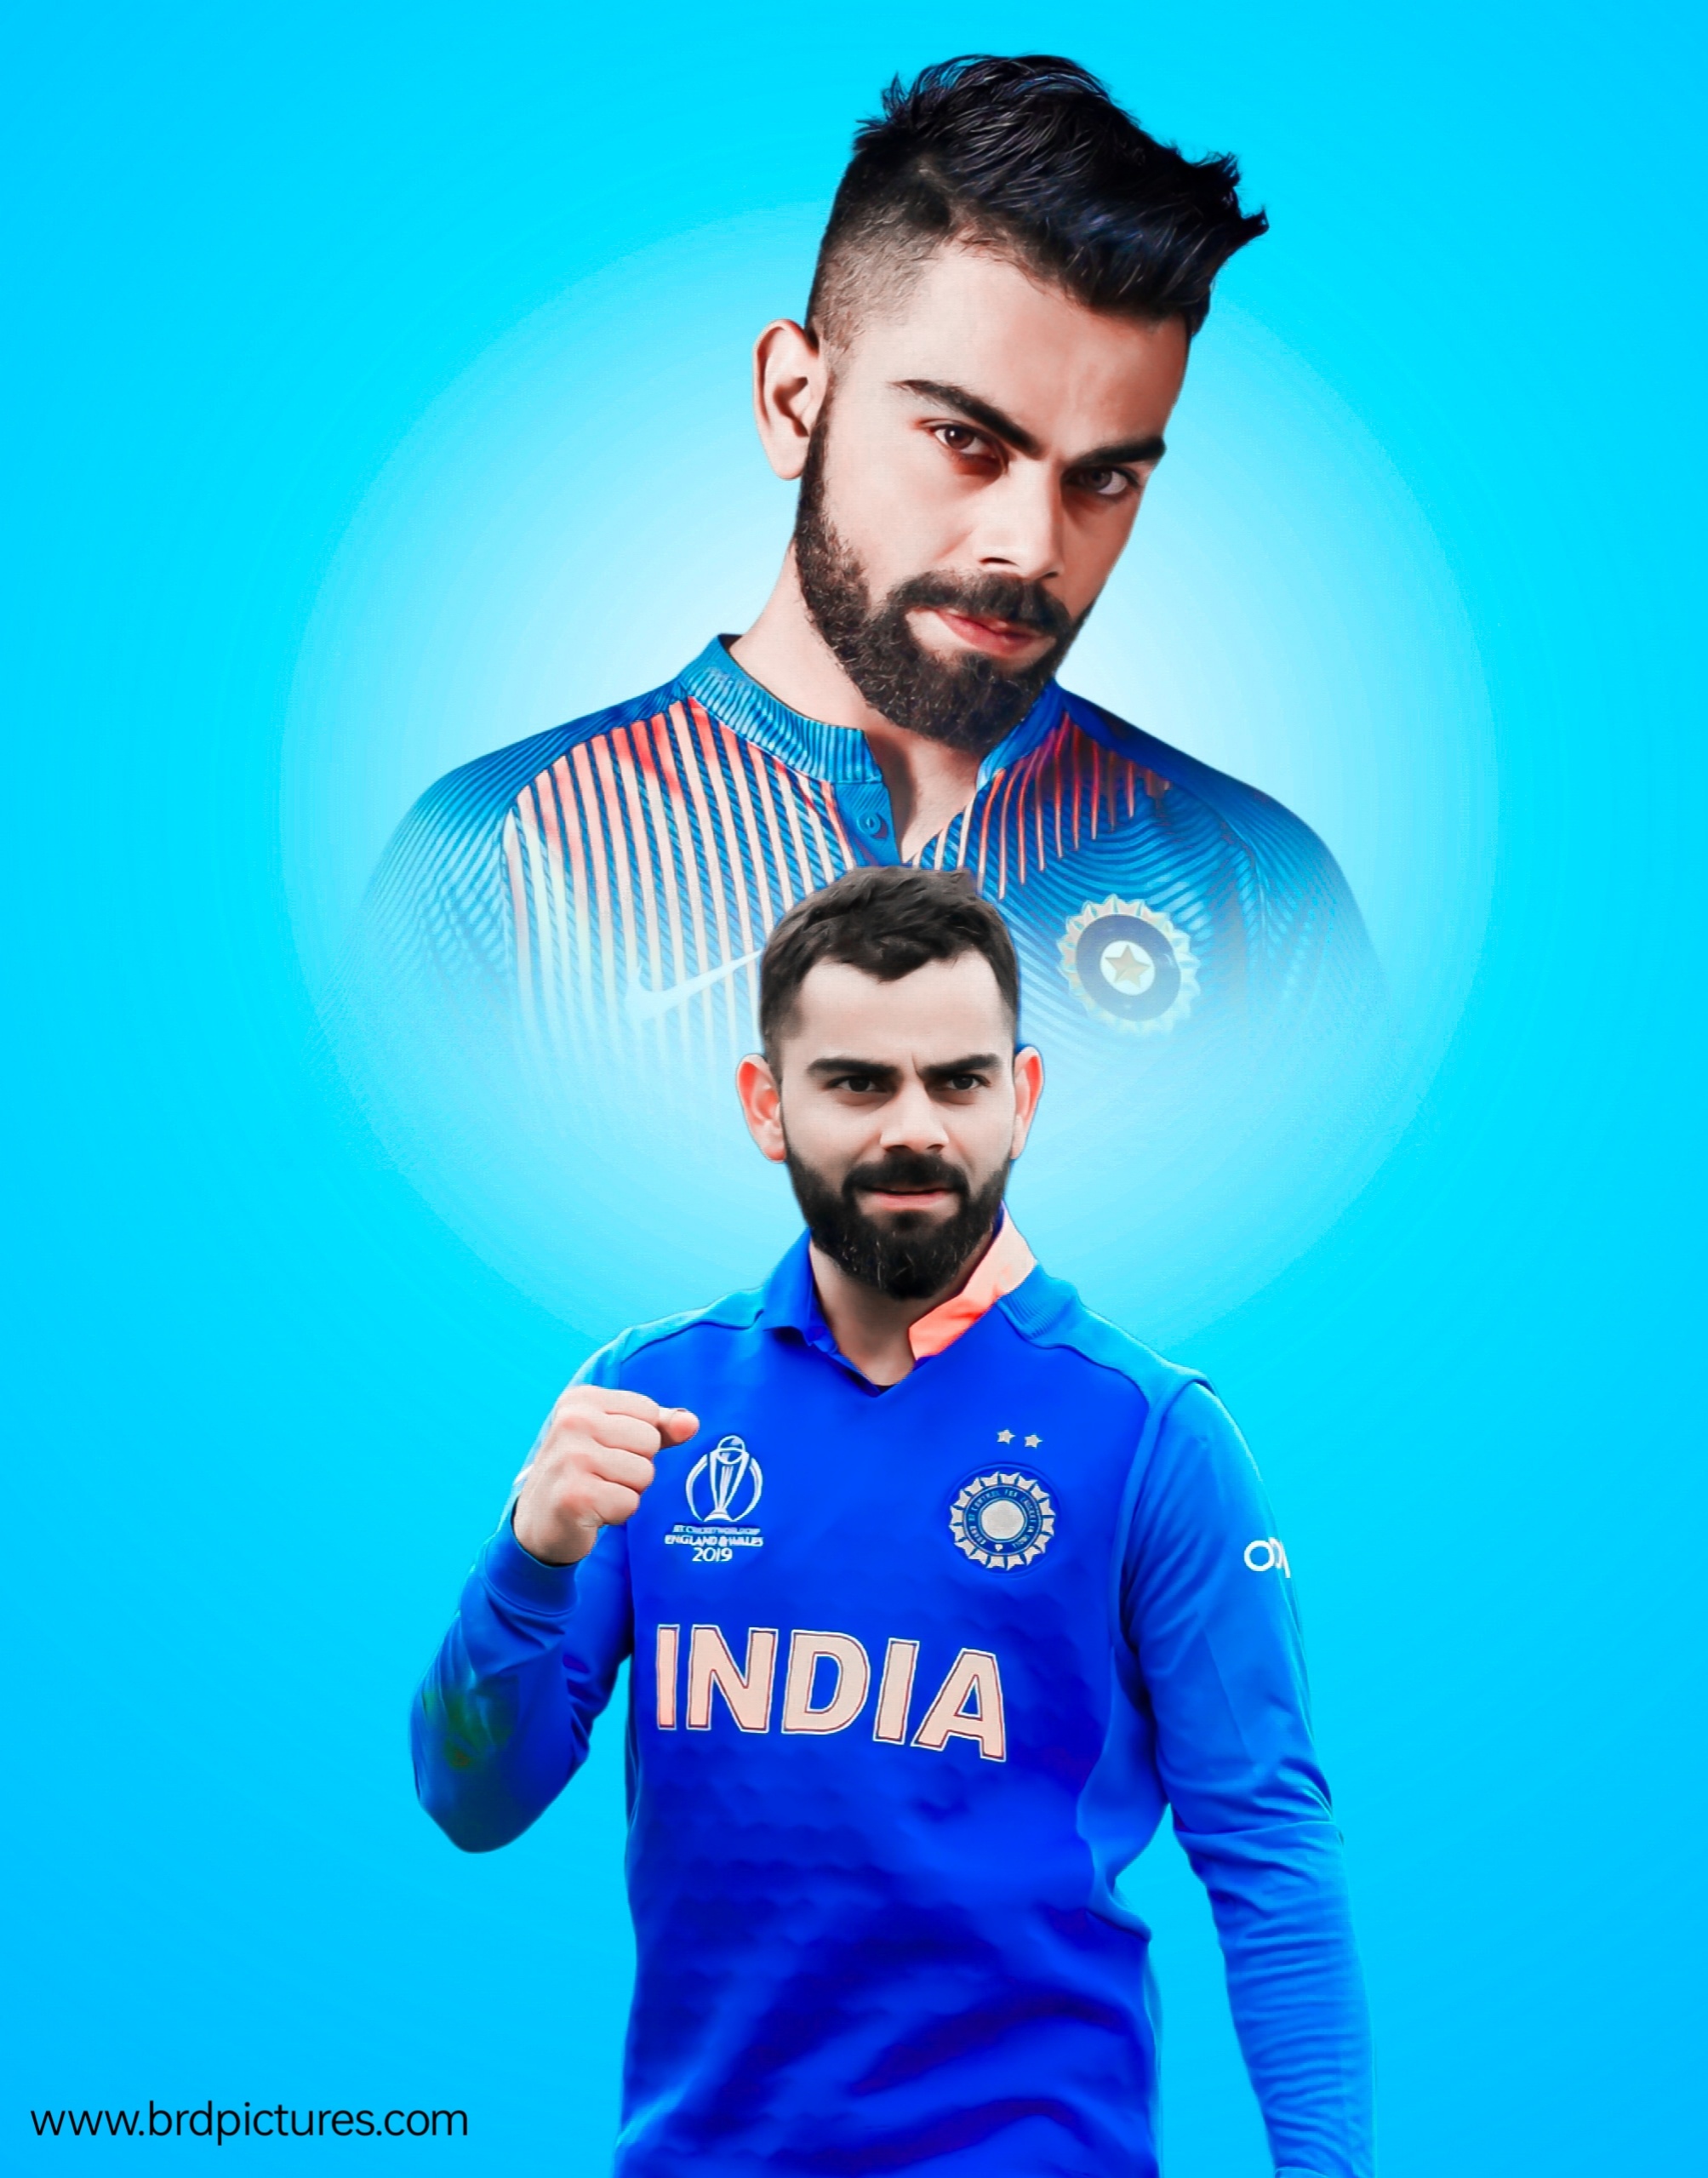 Virat Kohli Images And Photos With Wallpaper HD Download - BRD Pictures